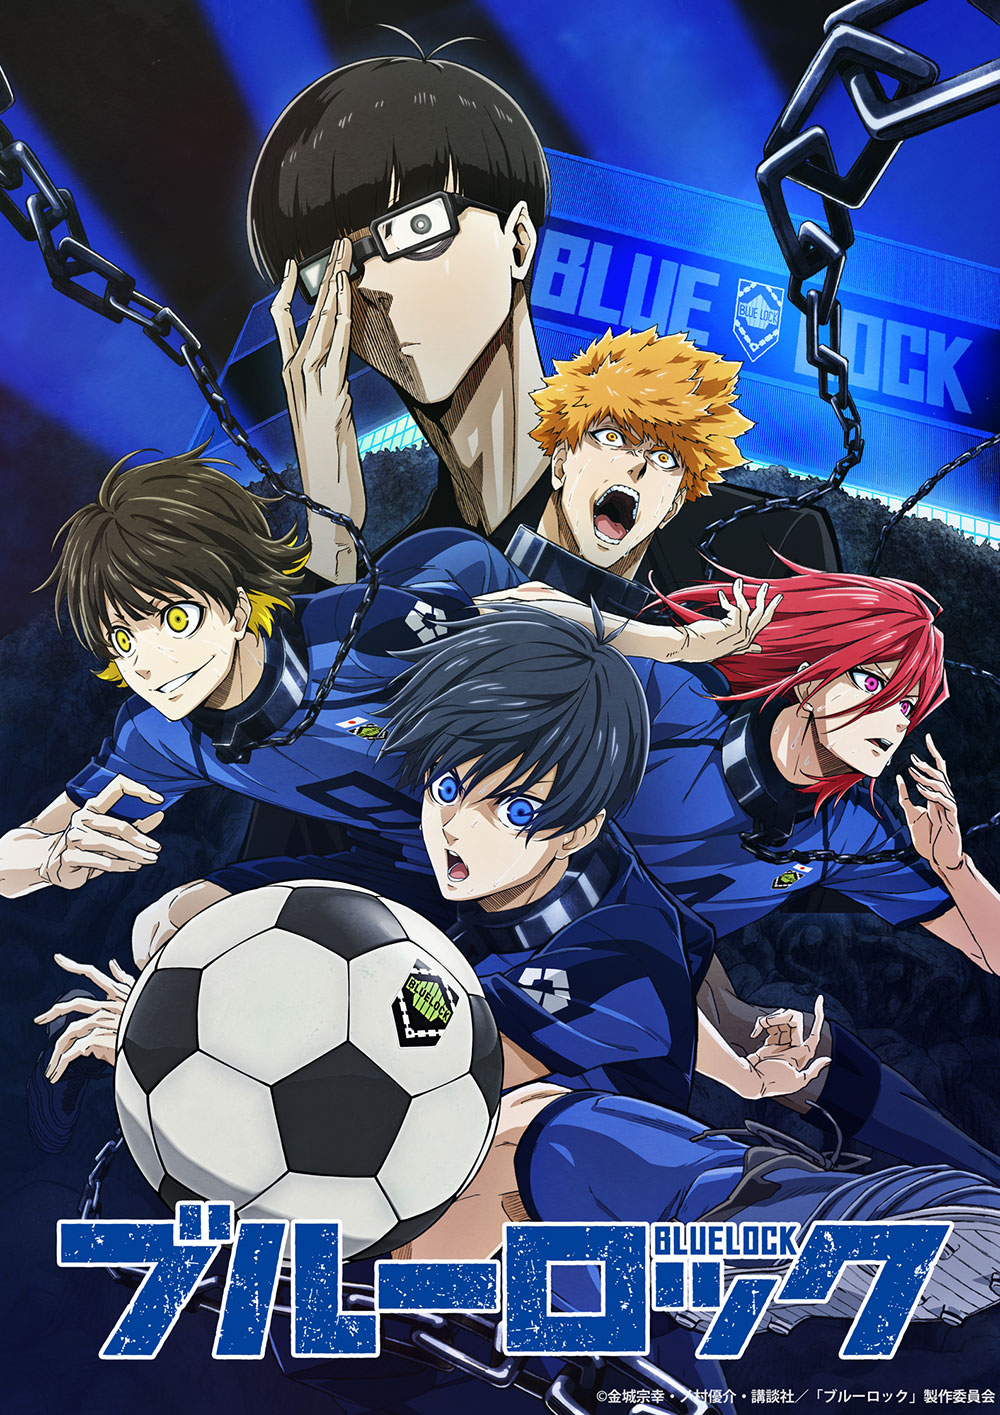 Crunchyroll - Soccer Anime Blue Lock Sets October 2022 Premiere with New  Visual, Trailer